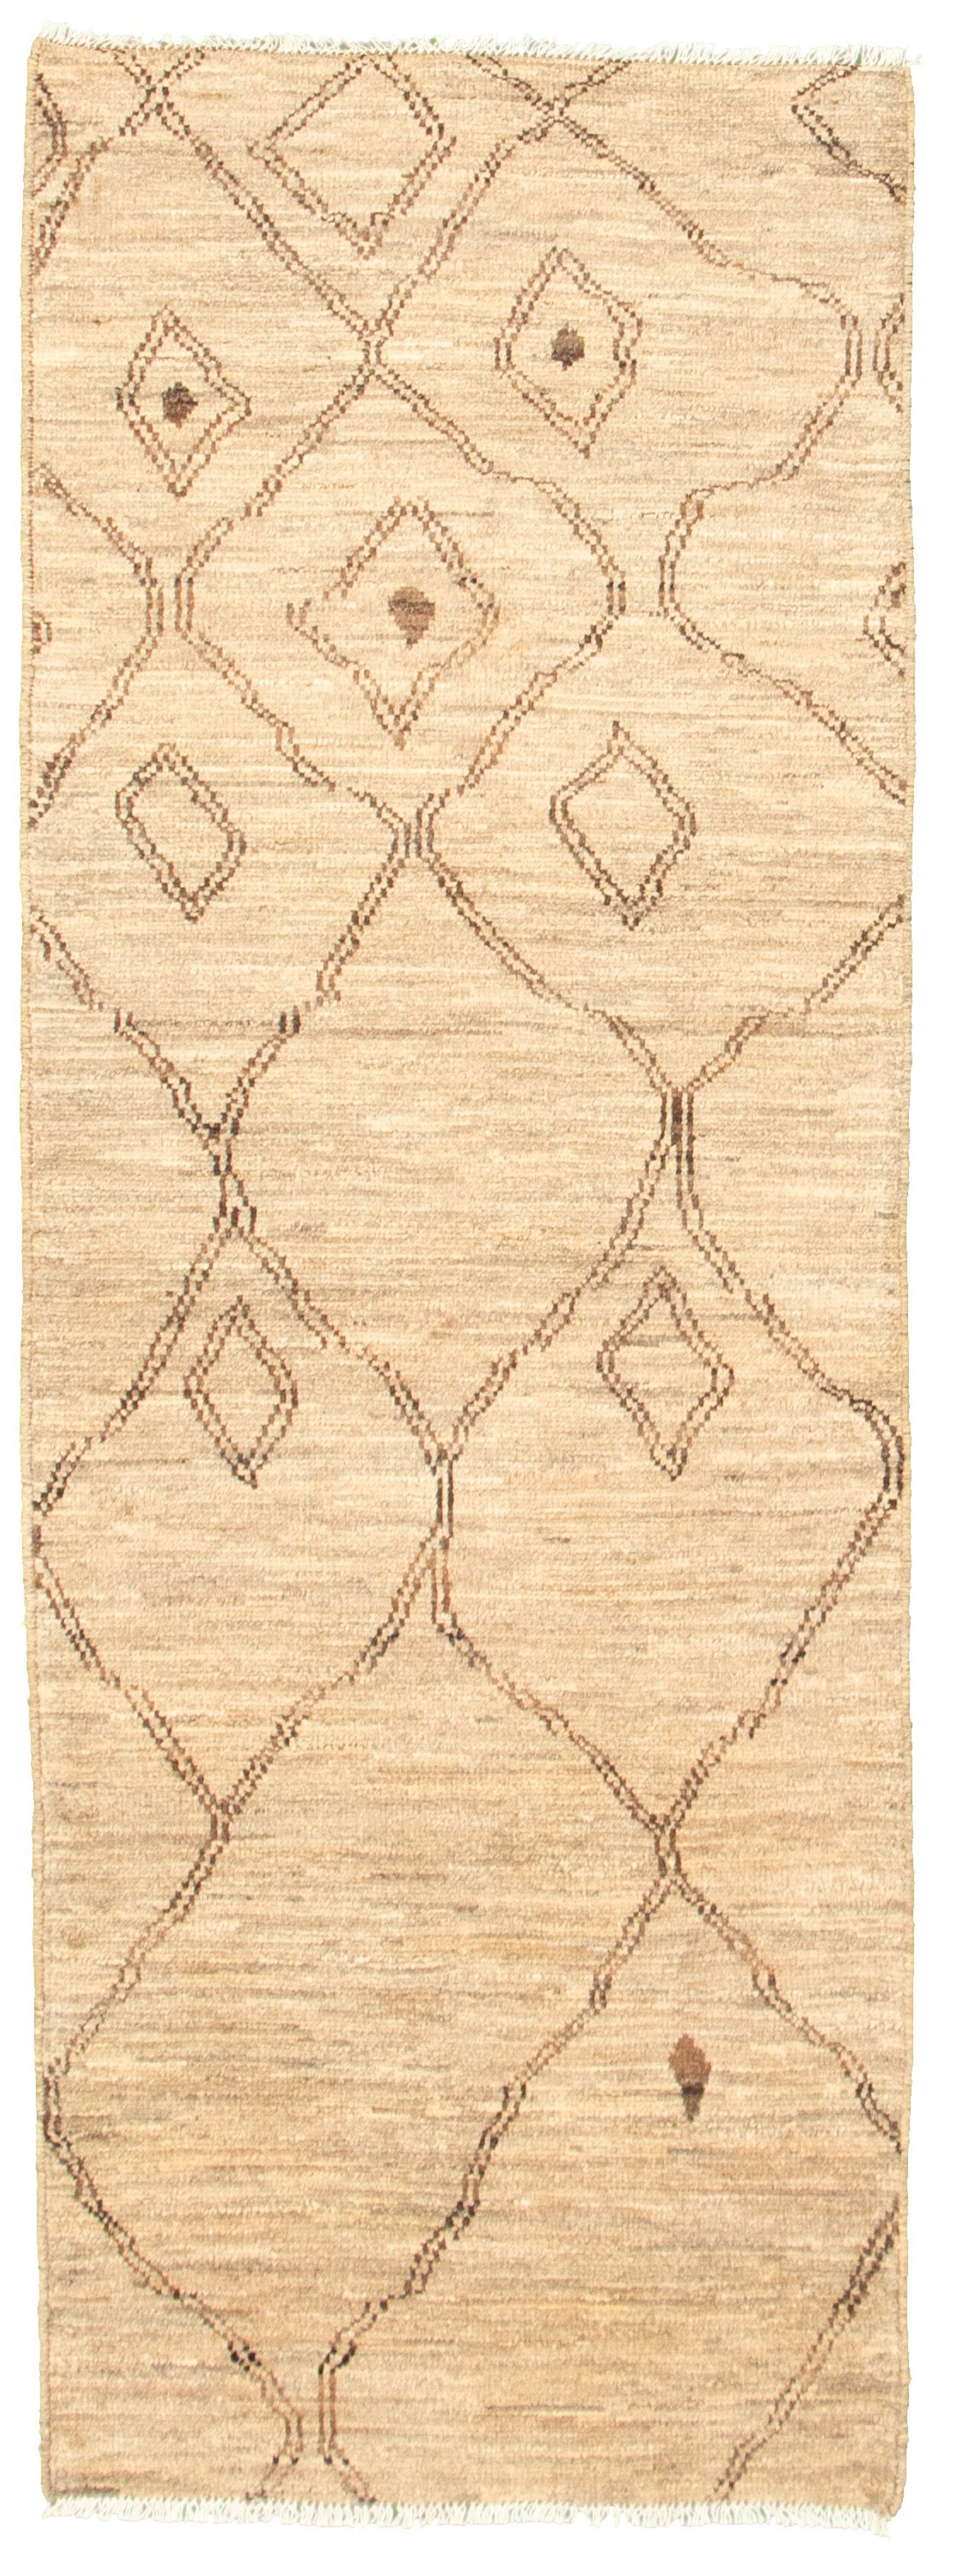 Hand-knotted Marrakech Khaki Wool Rug 2'10" x 7'9" Size: 2'10" x 7'9"  